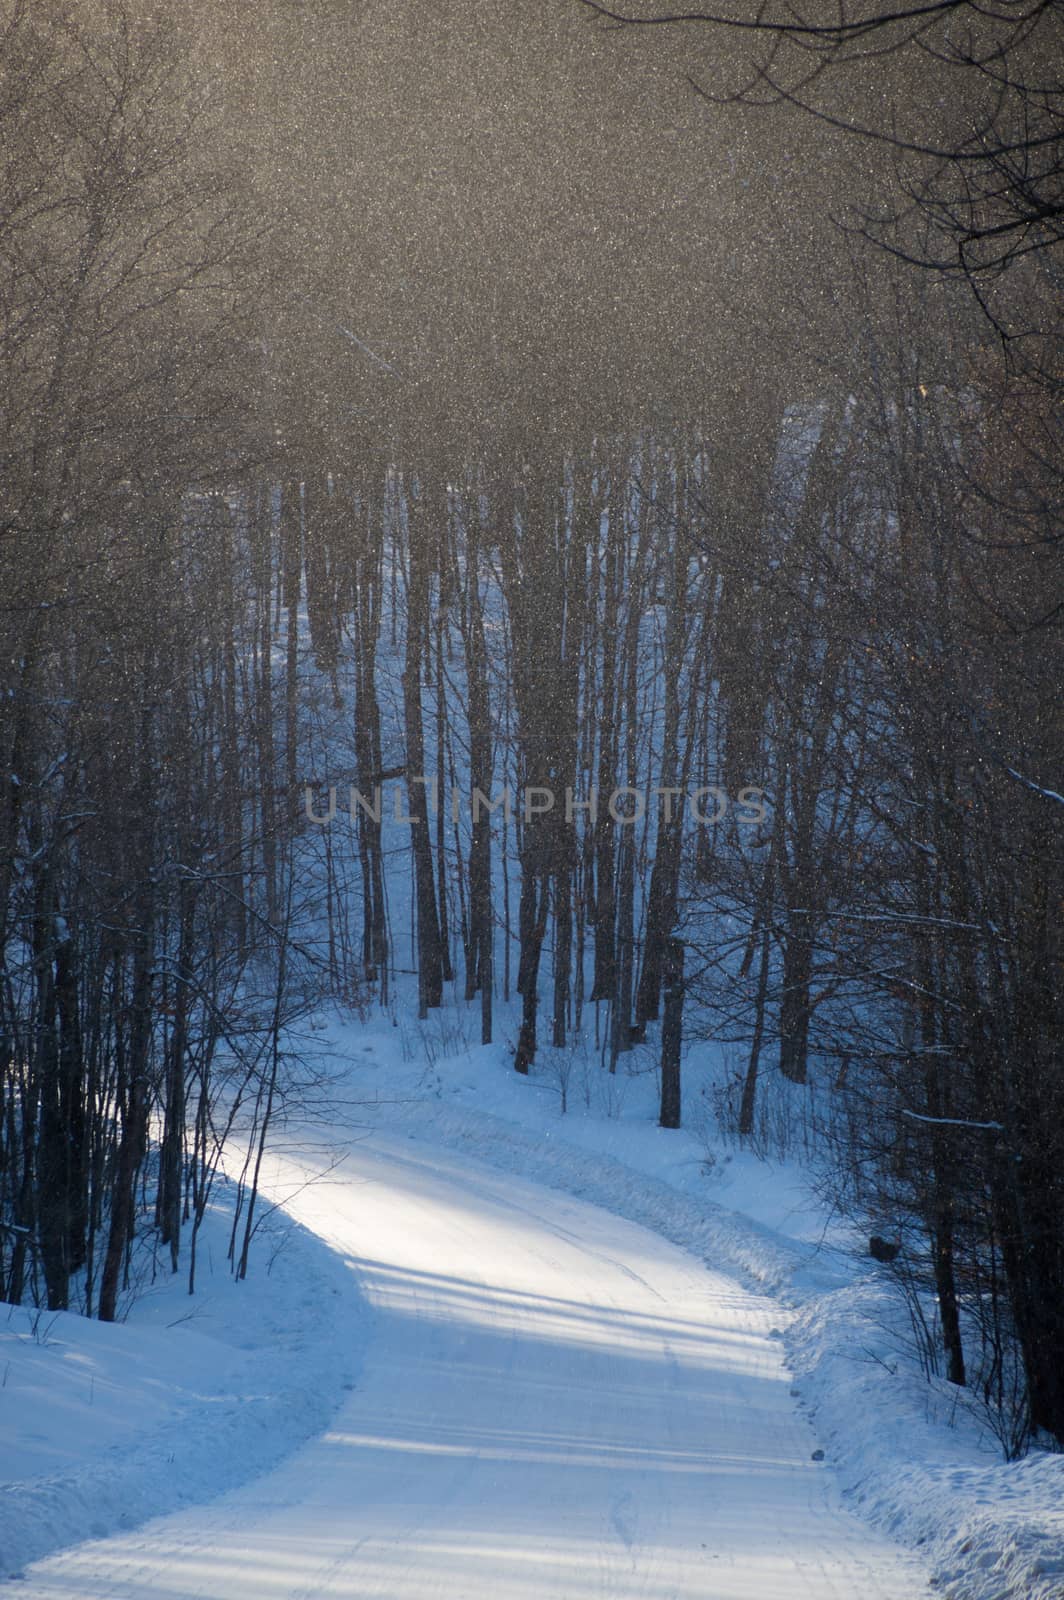 Snowy road and woodland in a snow squall with shadows by Sublimage